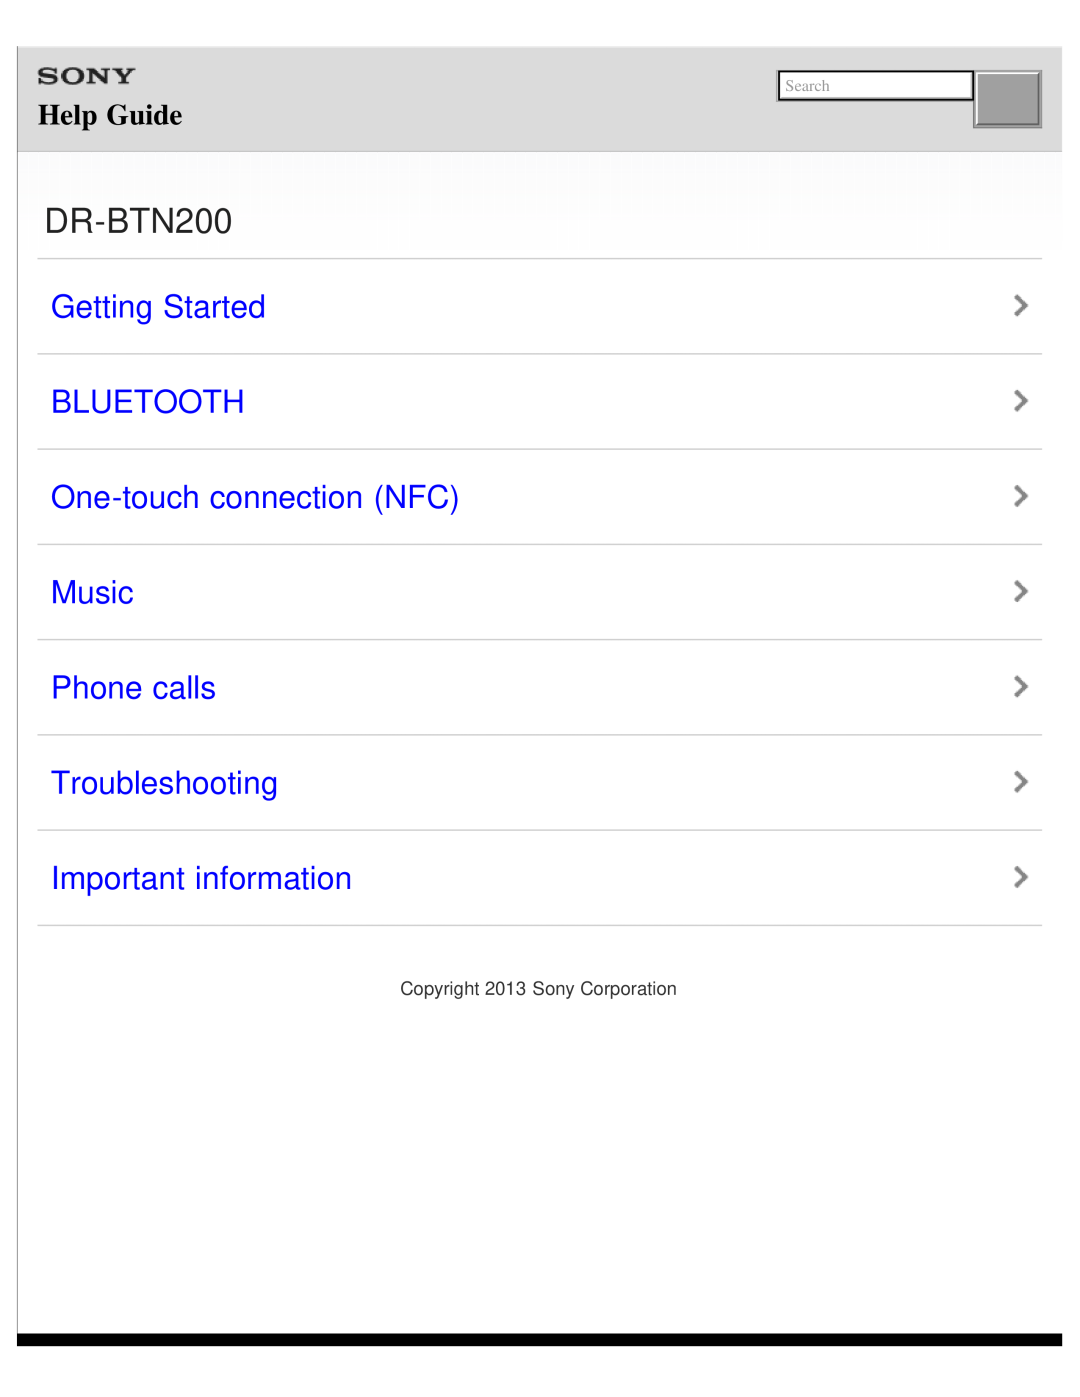 Sony DR-BTN200 manual Getting Started BLUETOOTH One-touchconnection NFC, Music Phone calls Troubleshooting, Help Guide 